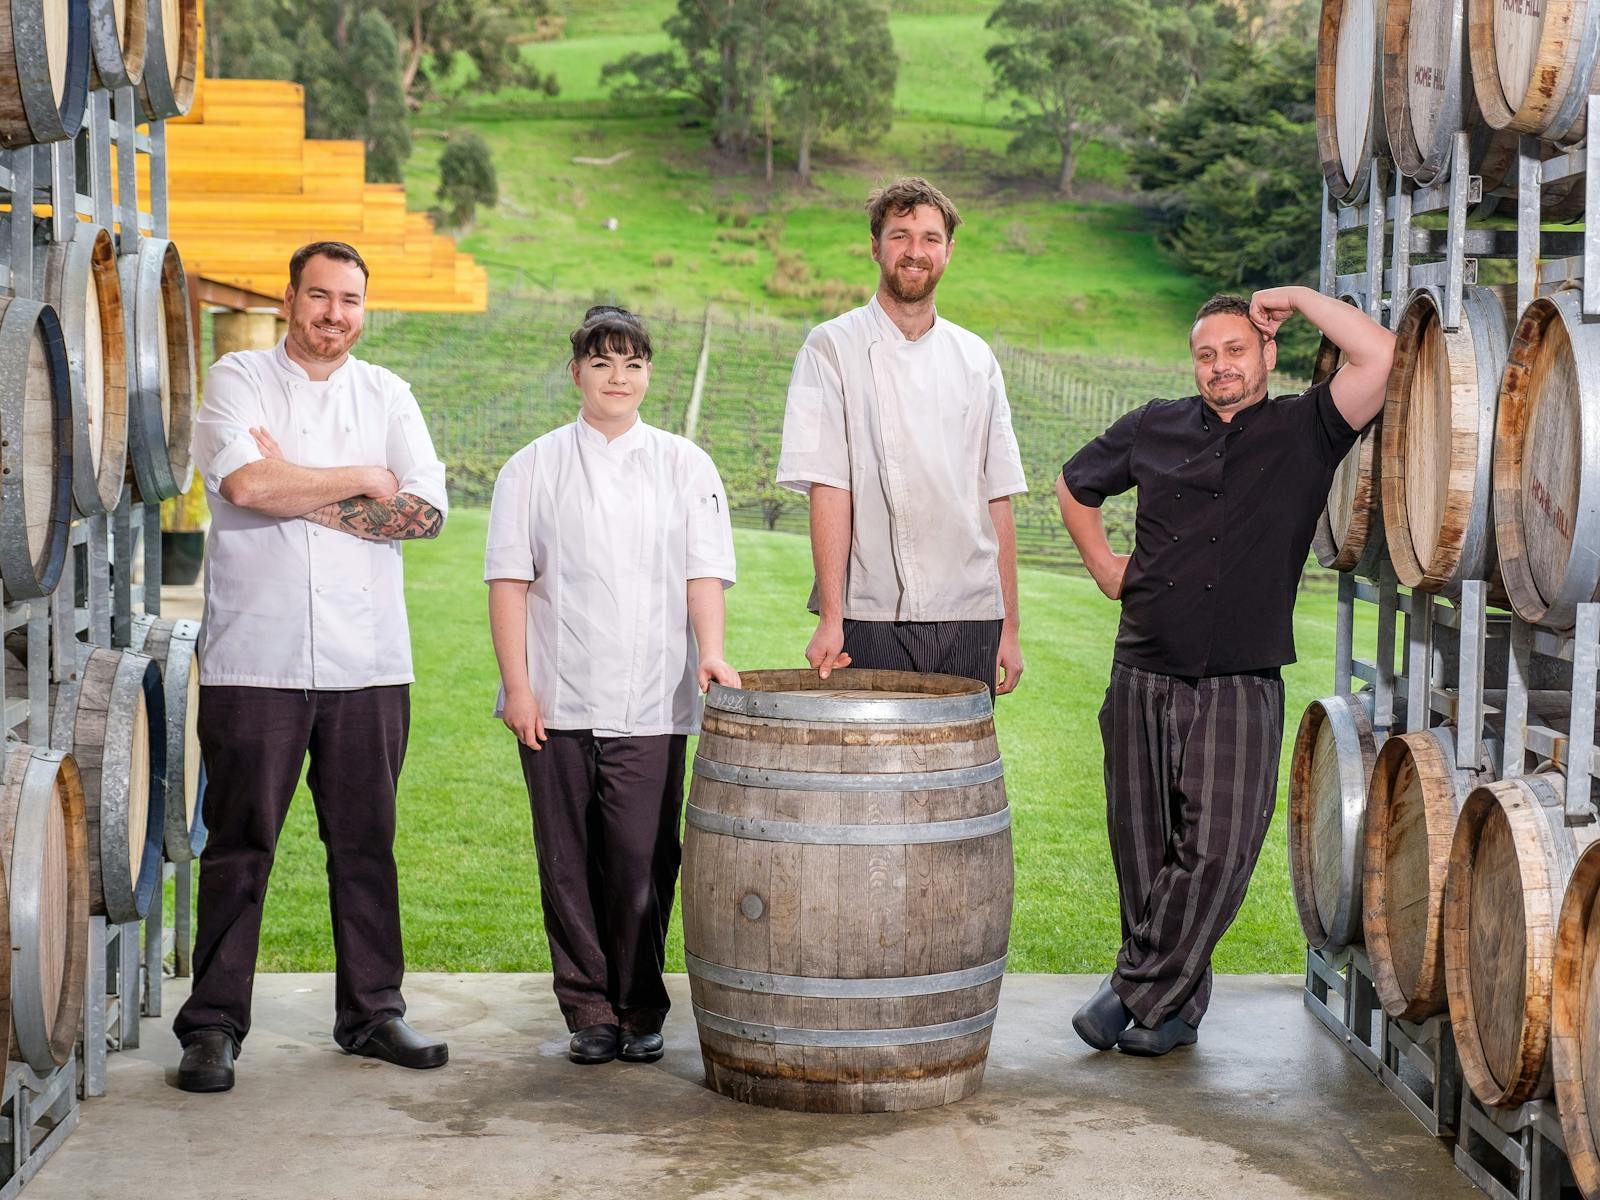 The Home Hill kitchen team